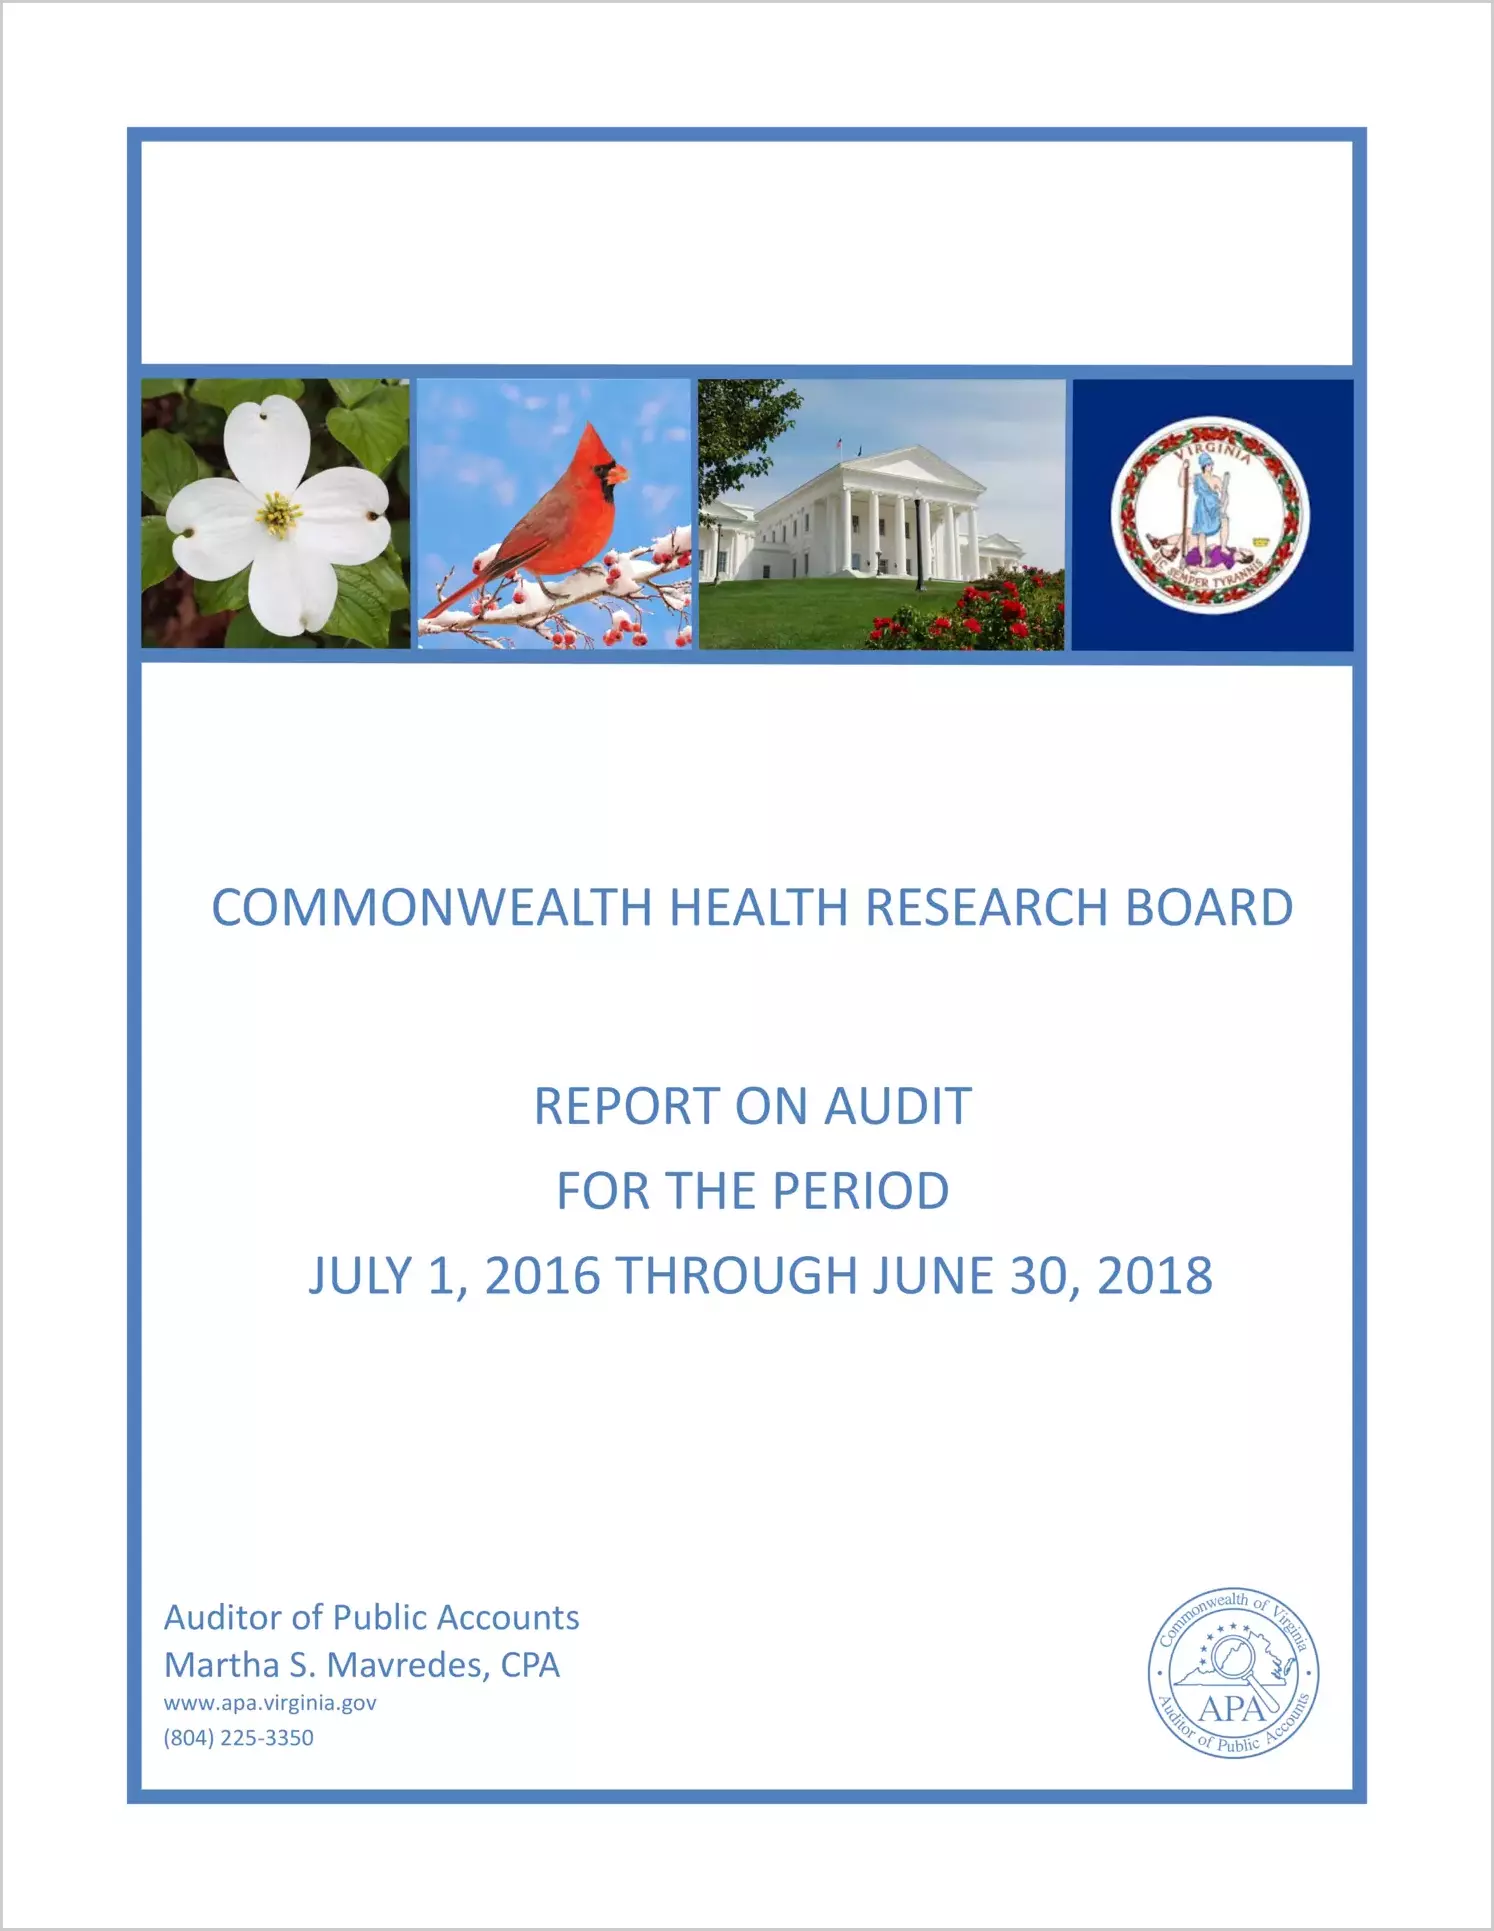 Commonwealth Health Research Board for the period July 1, 2016 through July 30, 2018